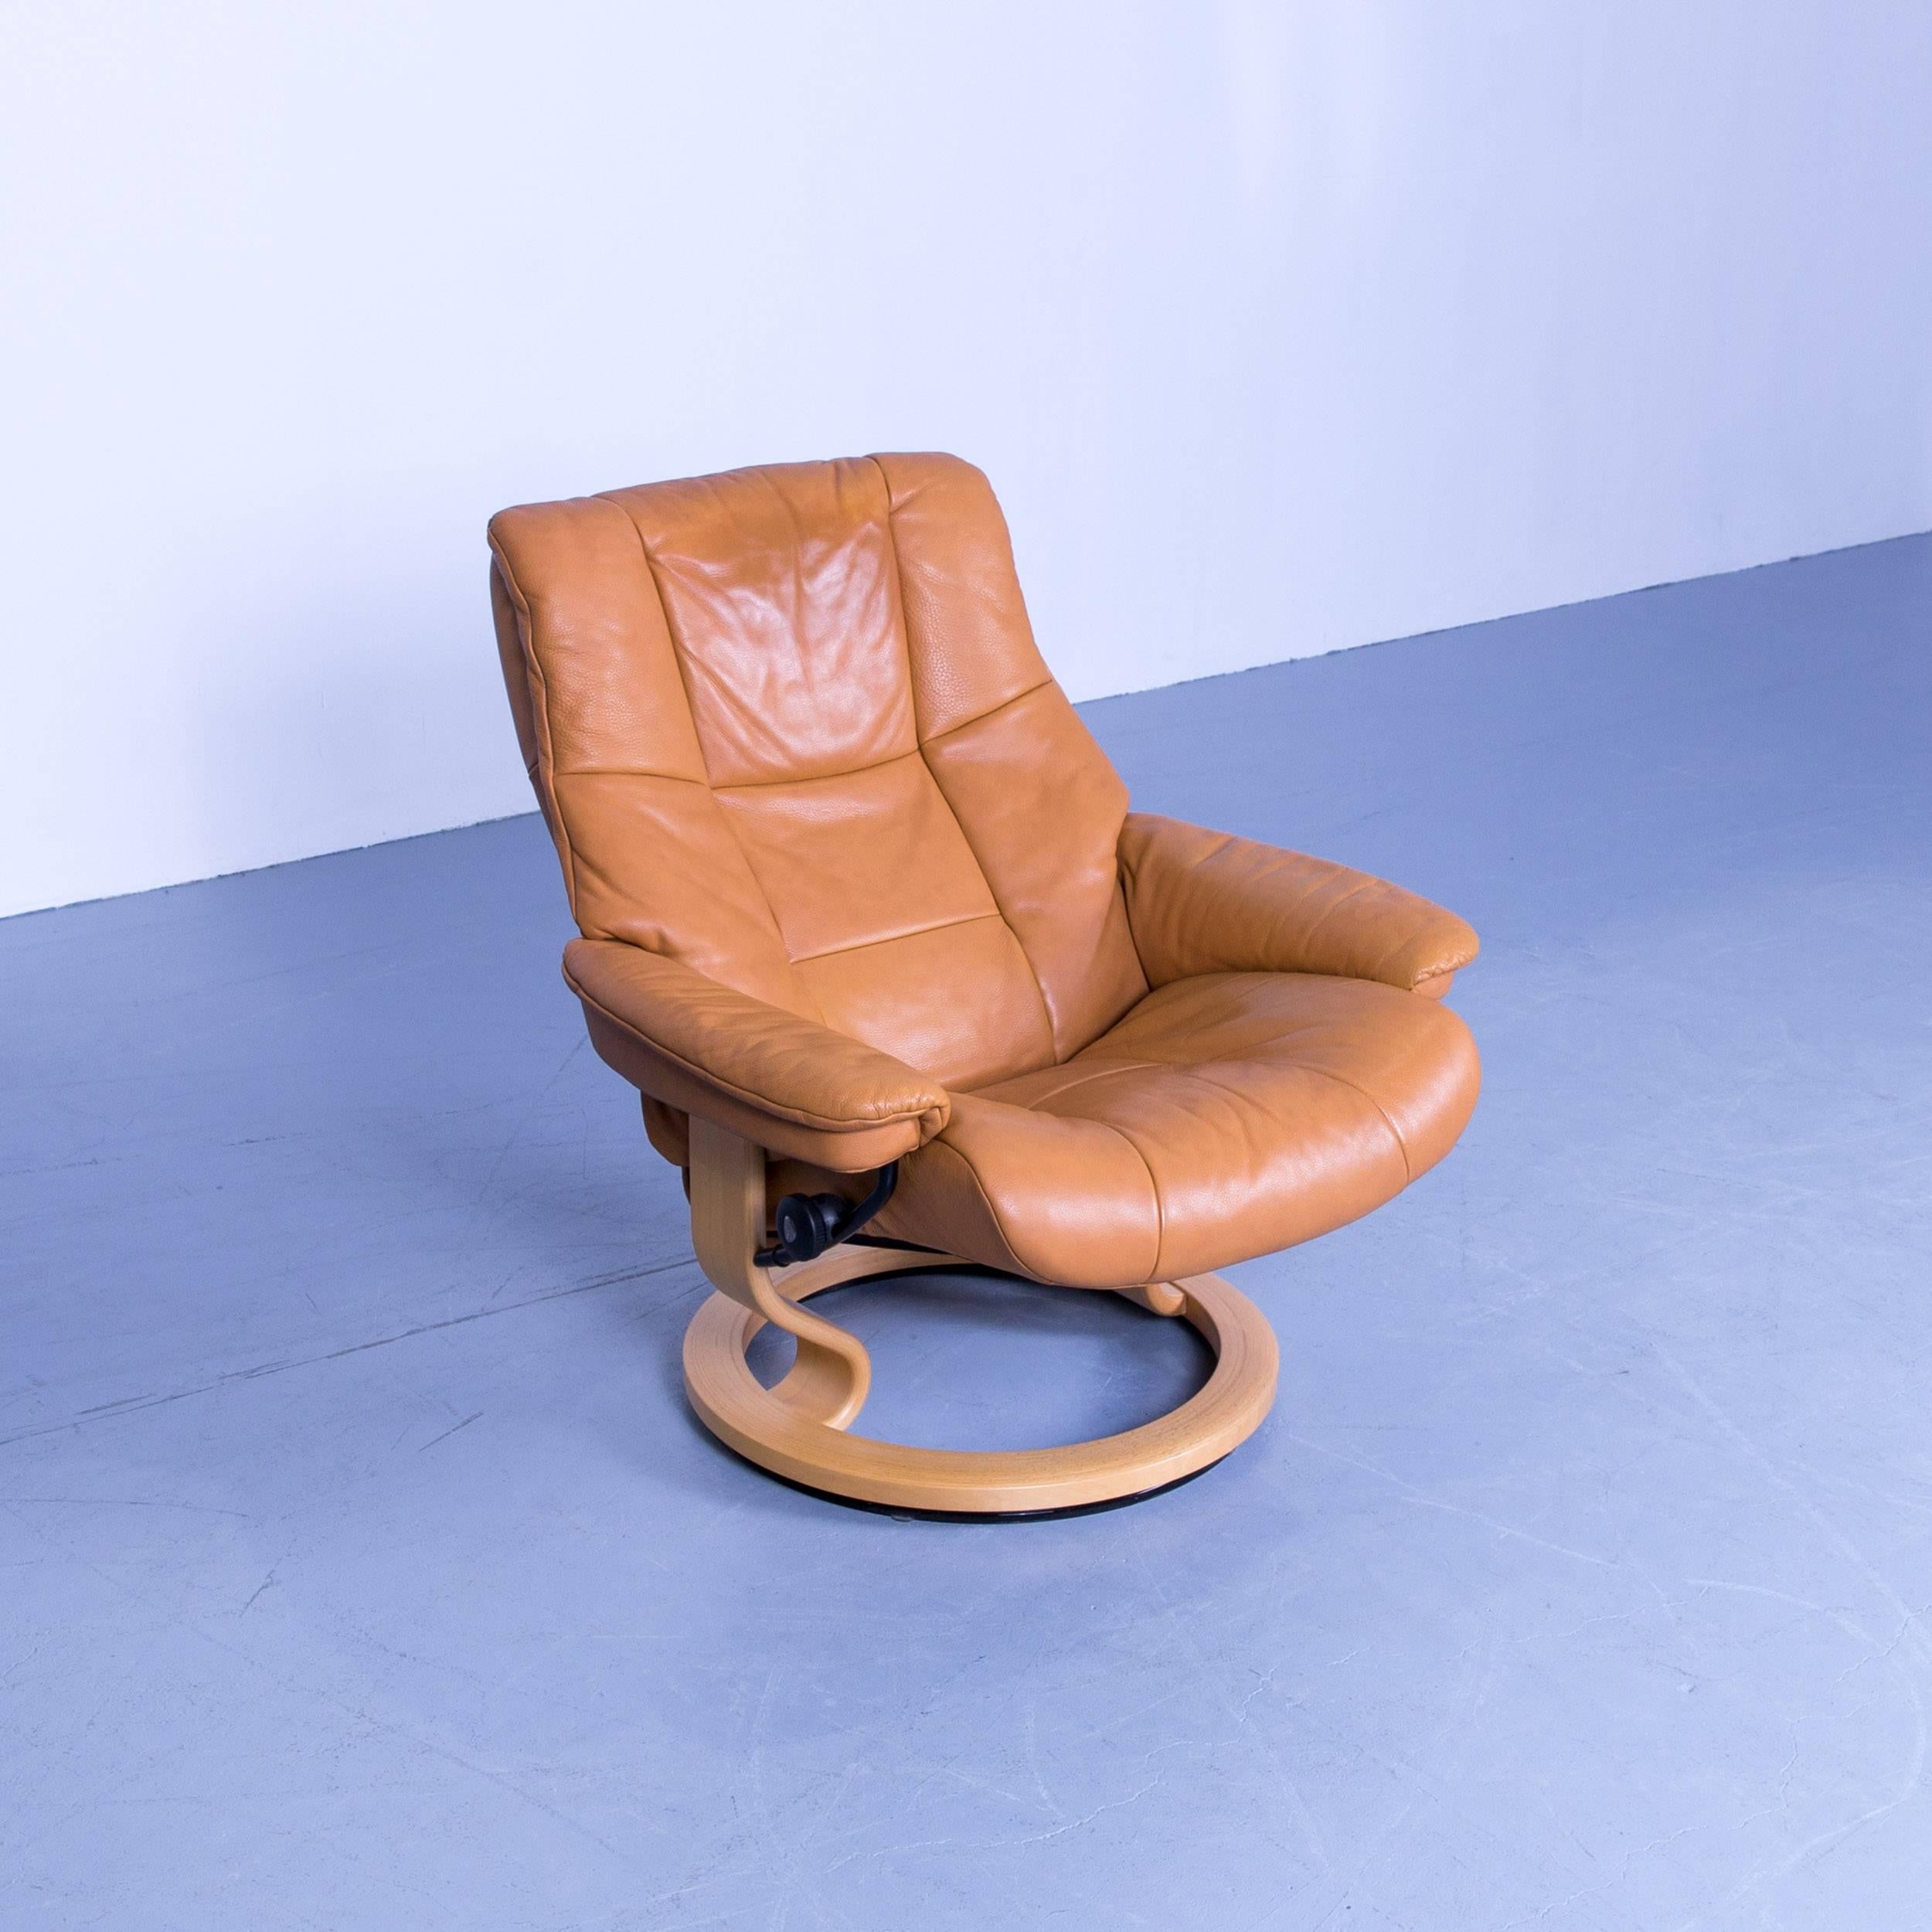 Stressless Mayfair relax armchair footstool orange brown leather relax recliner, with convenient functions, made for pure comfort and flexibility.